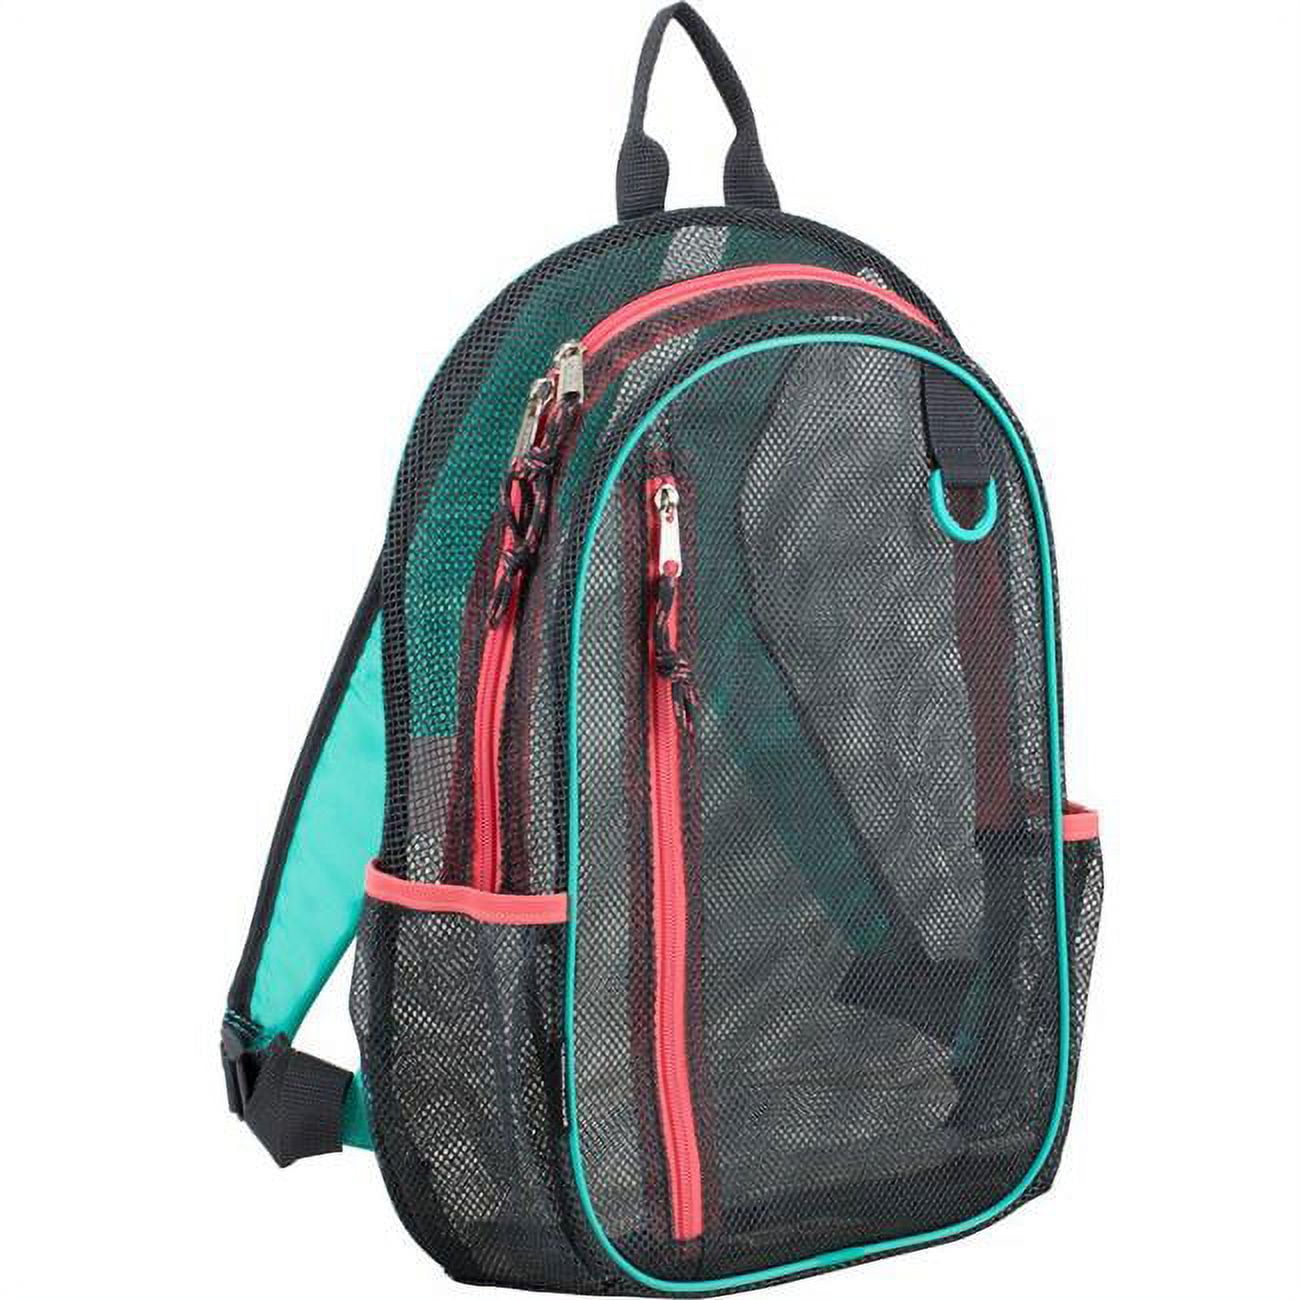 2326721 Mesh Active Backpack, Grey & Teal Pink - 17 In. - Case Of 12